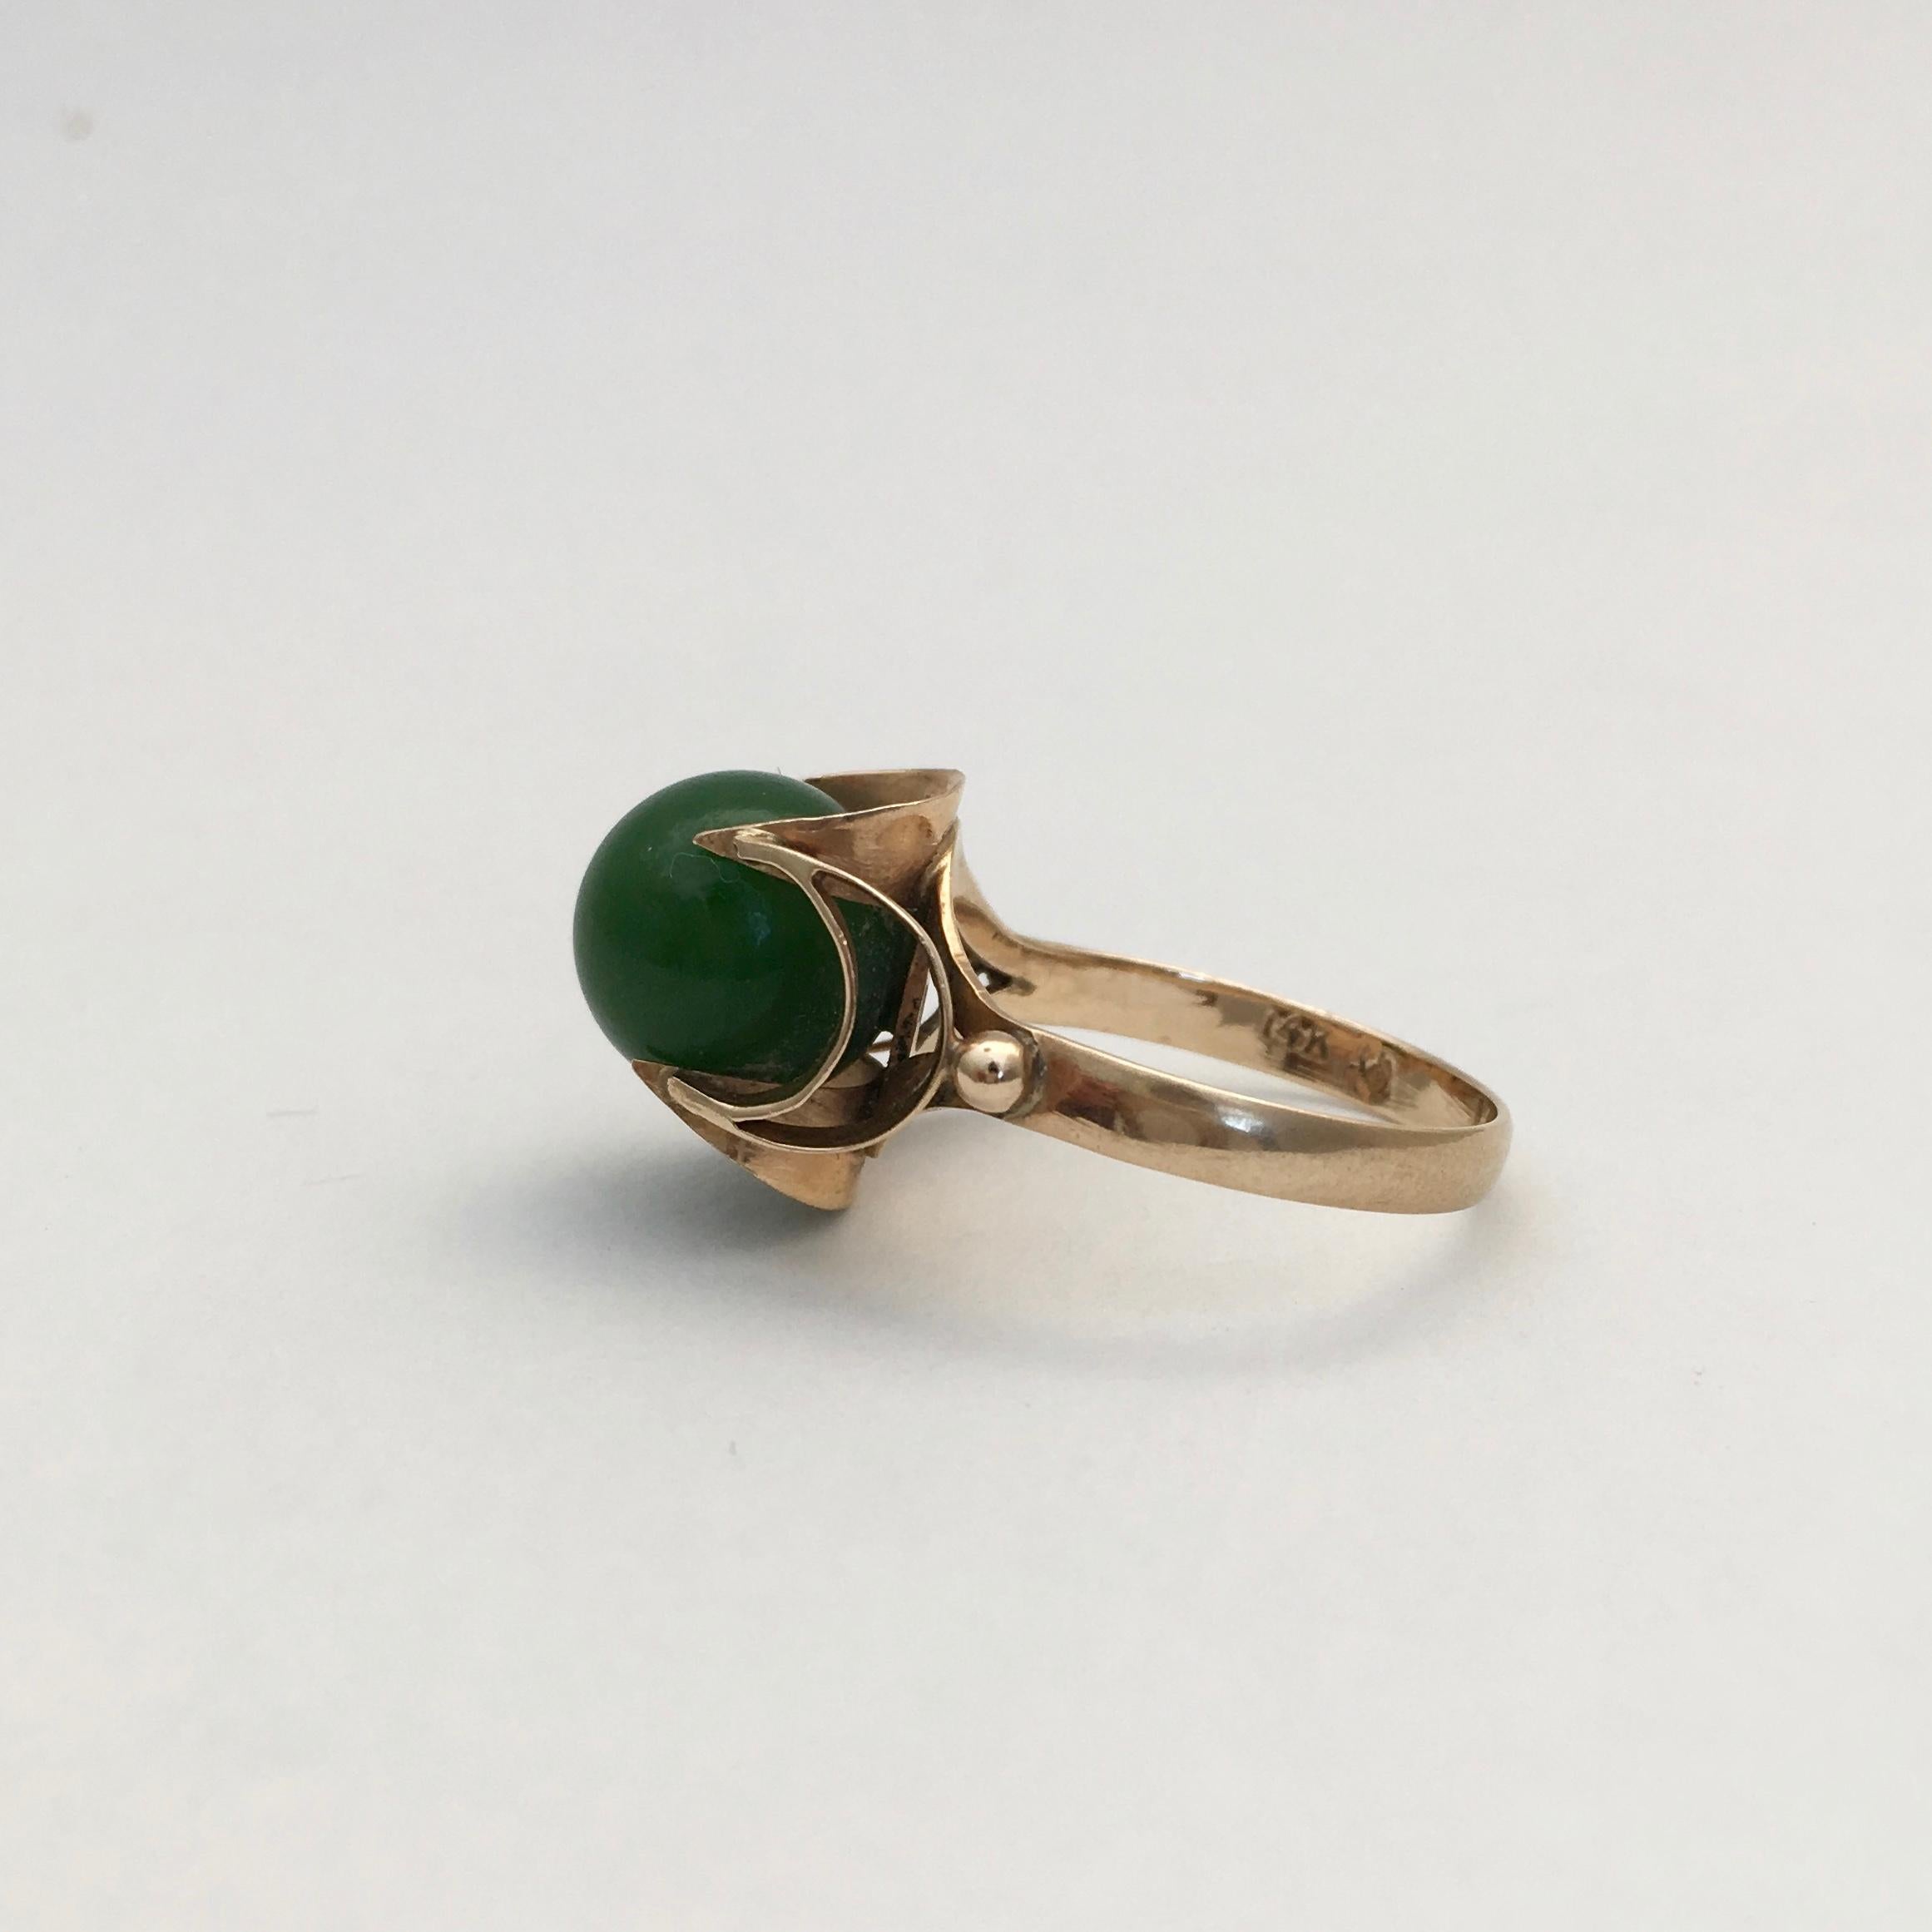 Jade Ring 14K Gold Vintage Jewelry Spherical Ball Gemstone Midcentury Modernist In Excellent Condition For Sale In London, GB